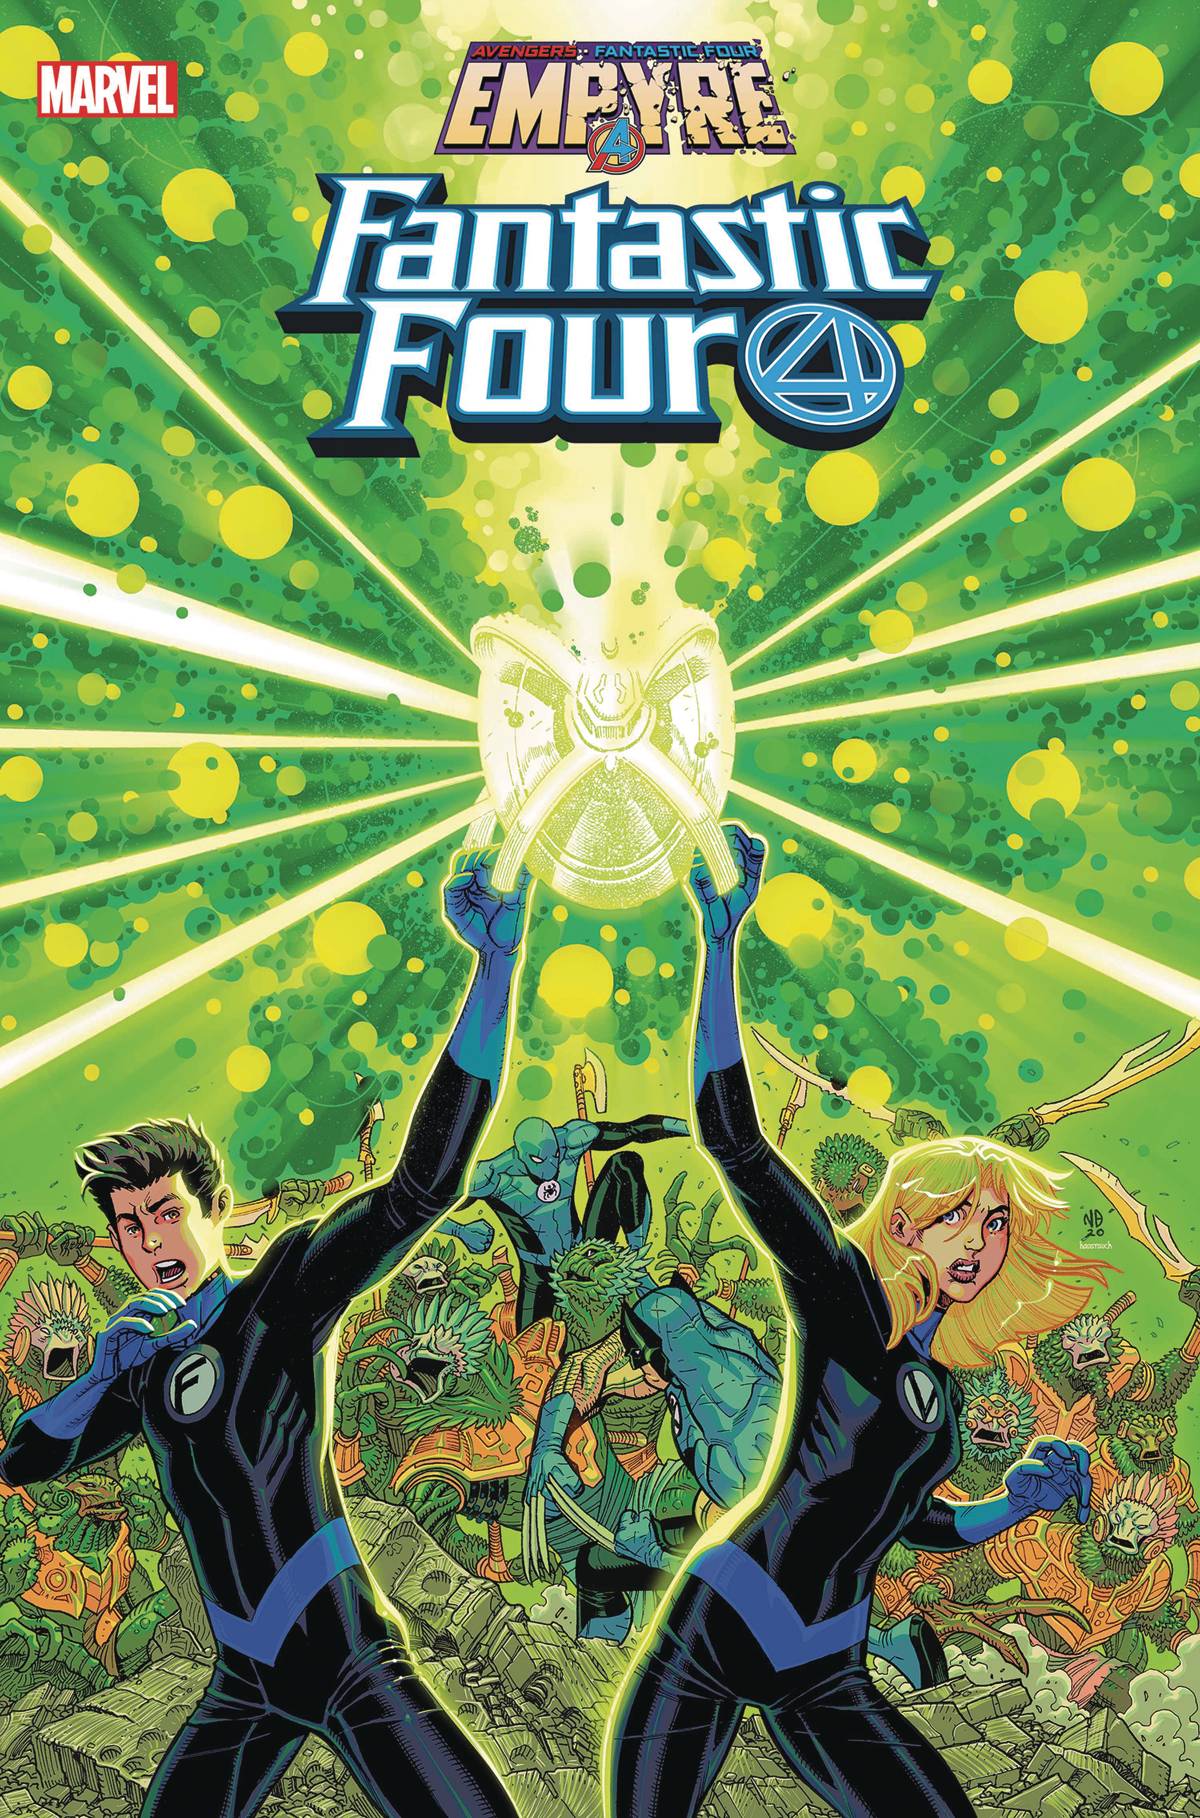 Fantastic Four Empyre 23 - Heroes Cave